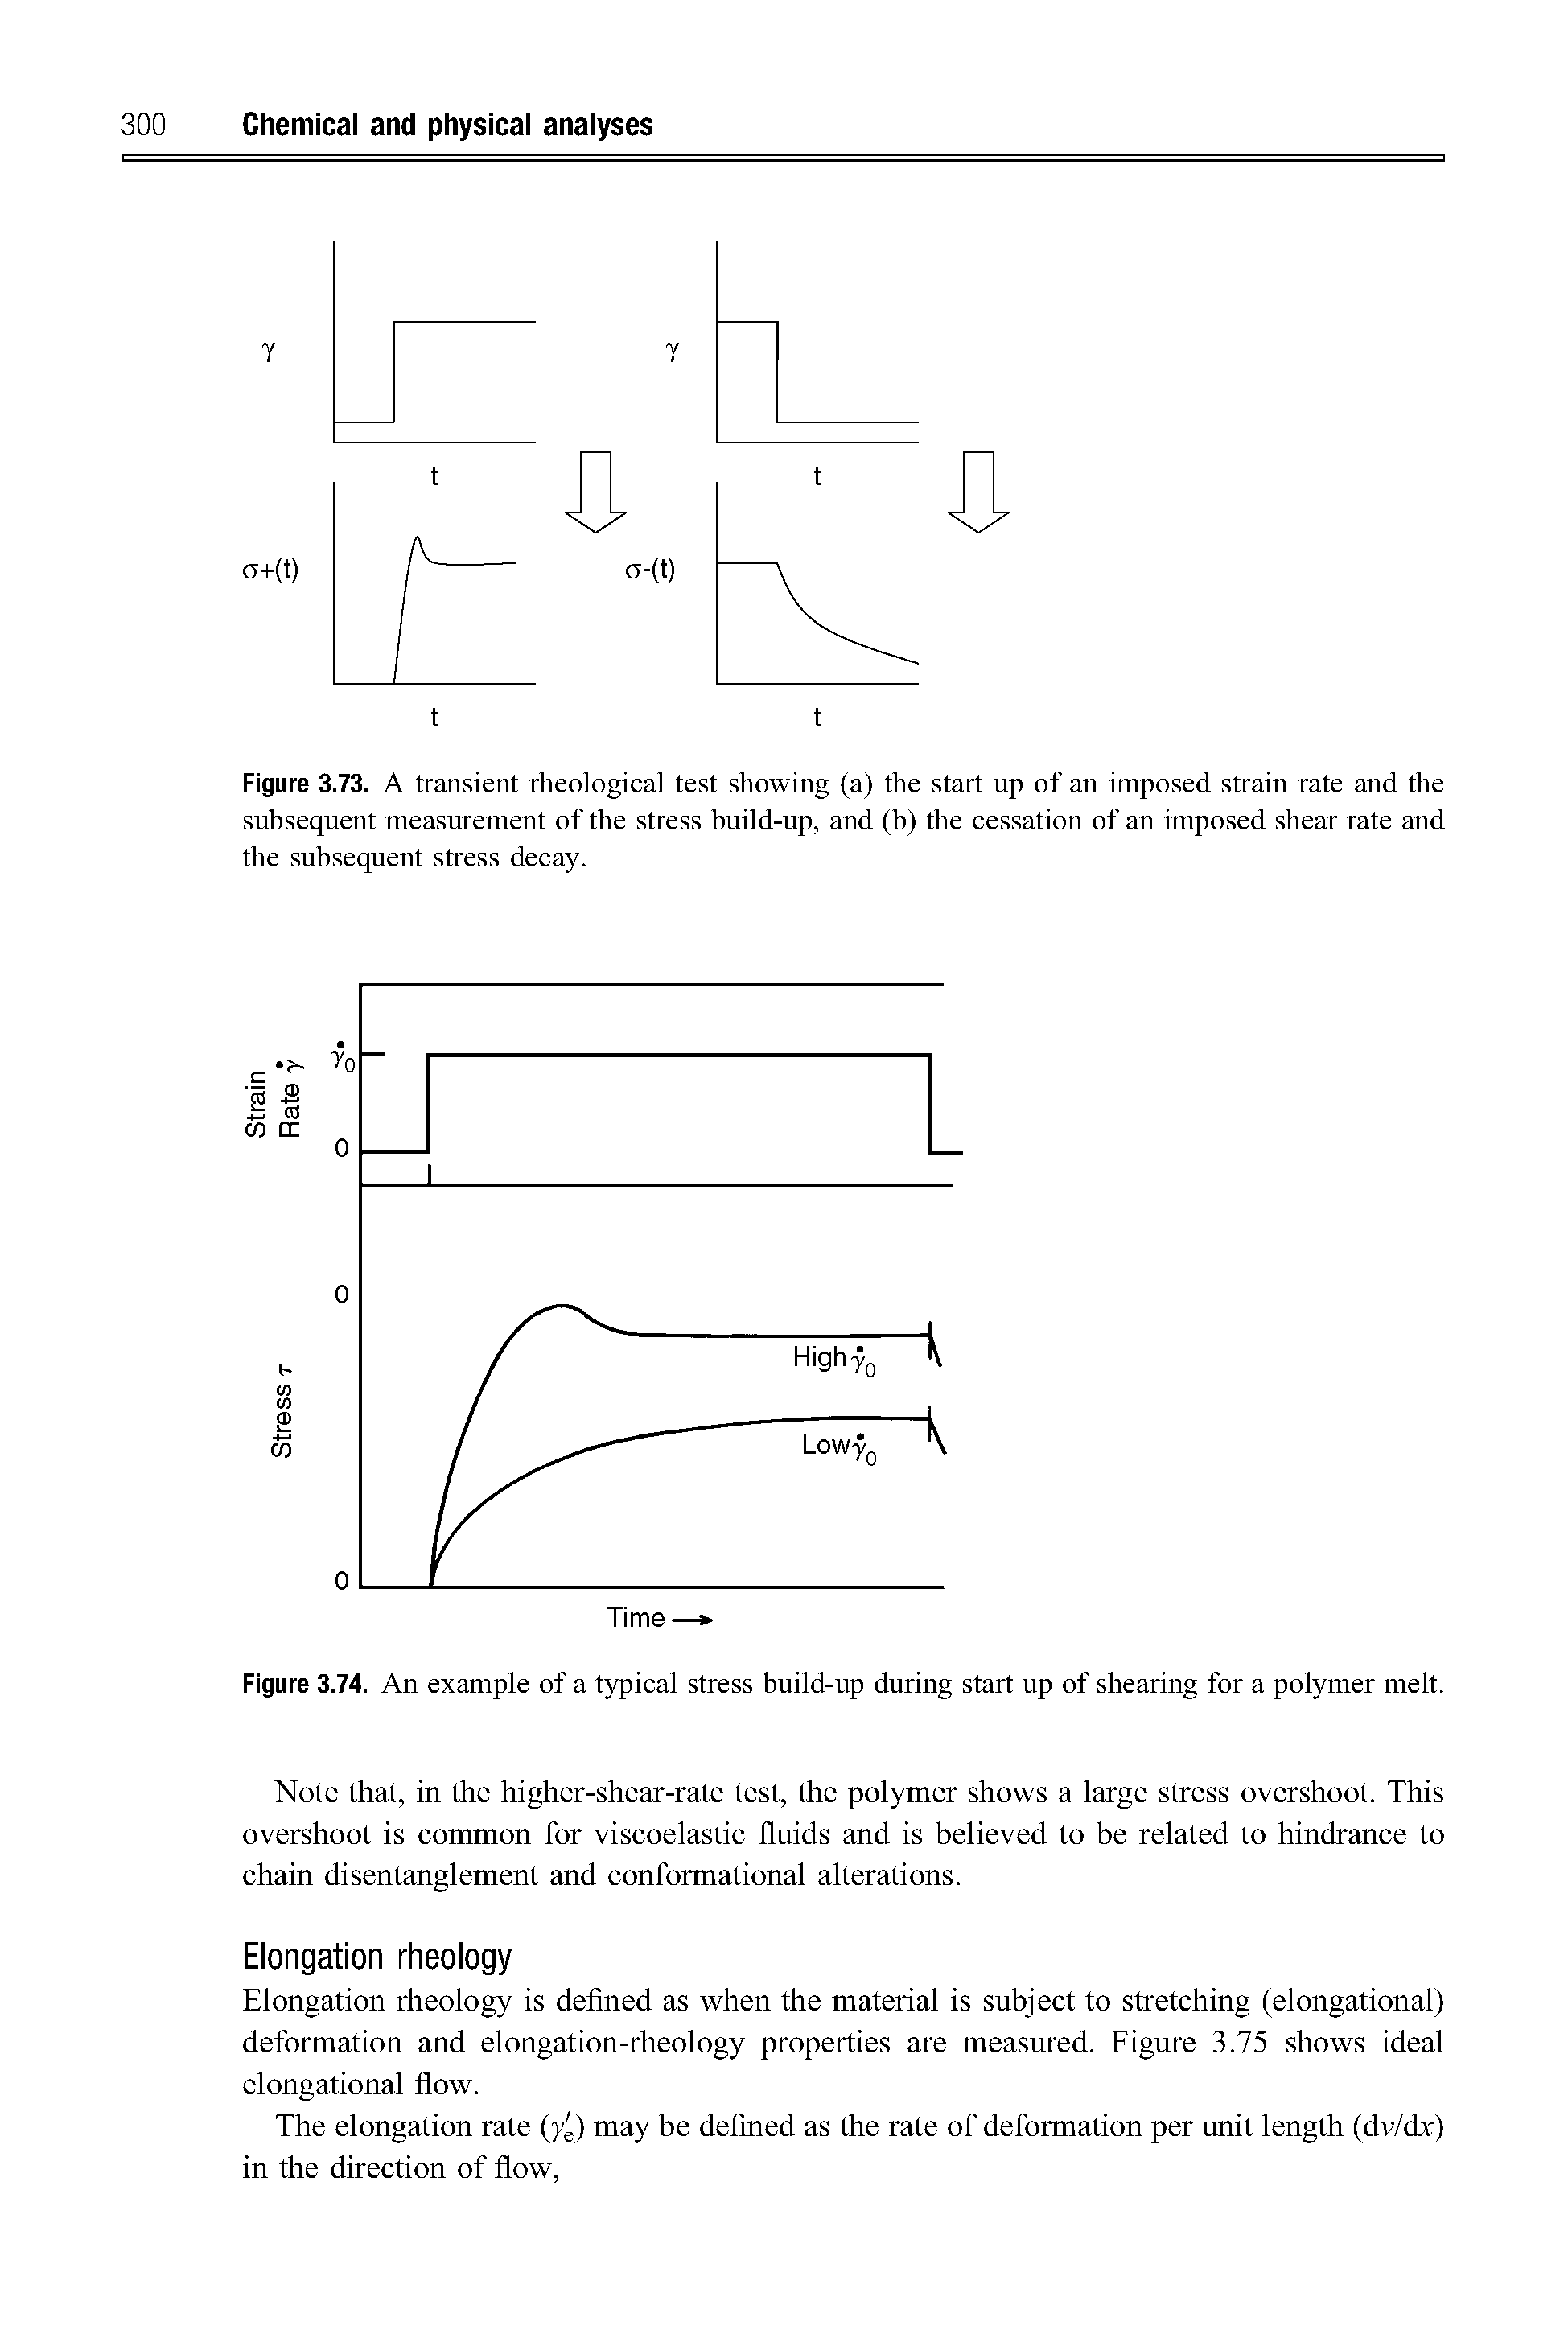 Figure 3.73. A transient rheological test showing (a) the start up of an imposed strain rate and the subsequent measurement of the stress build-up, and (b) the cessation of an imposed shear rate and the subsequent stress decay.